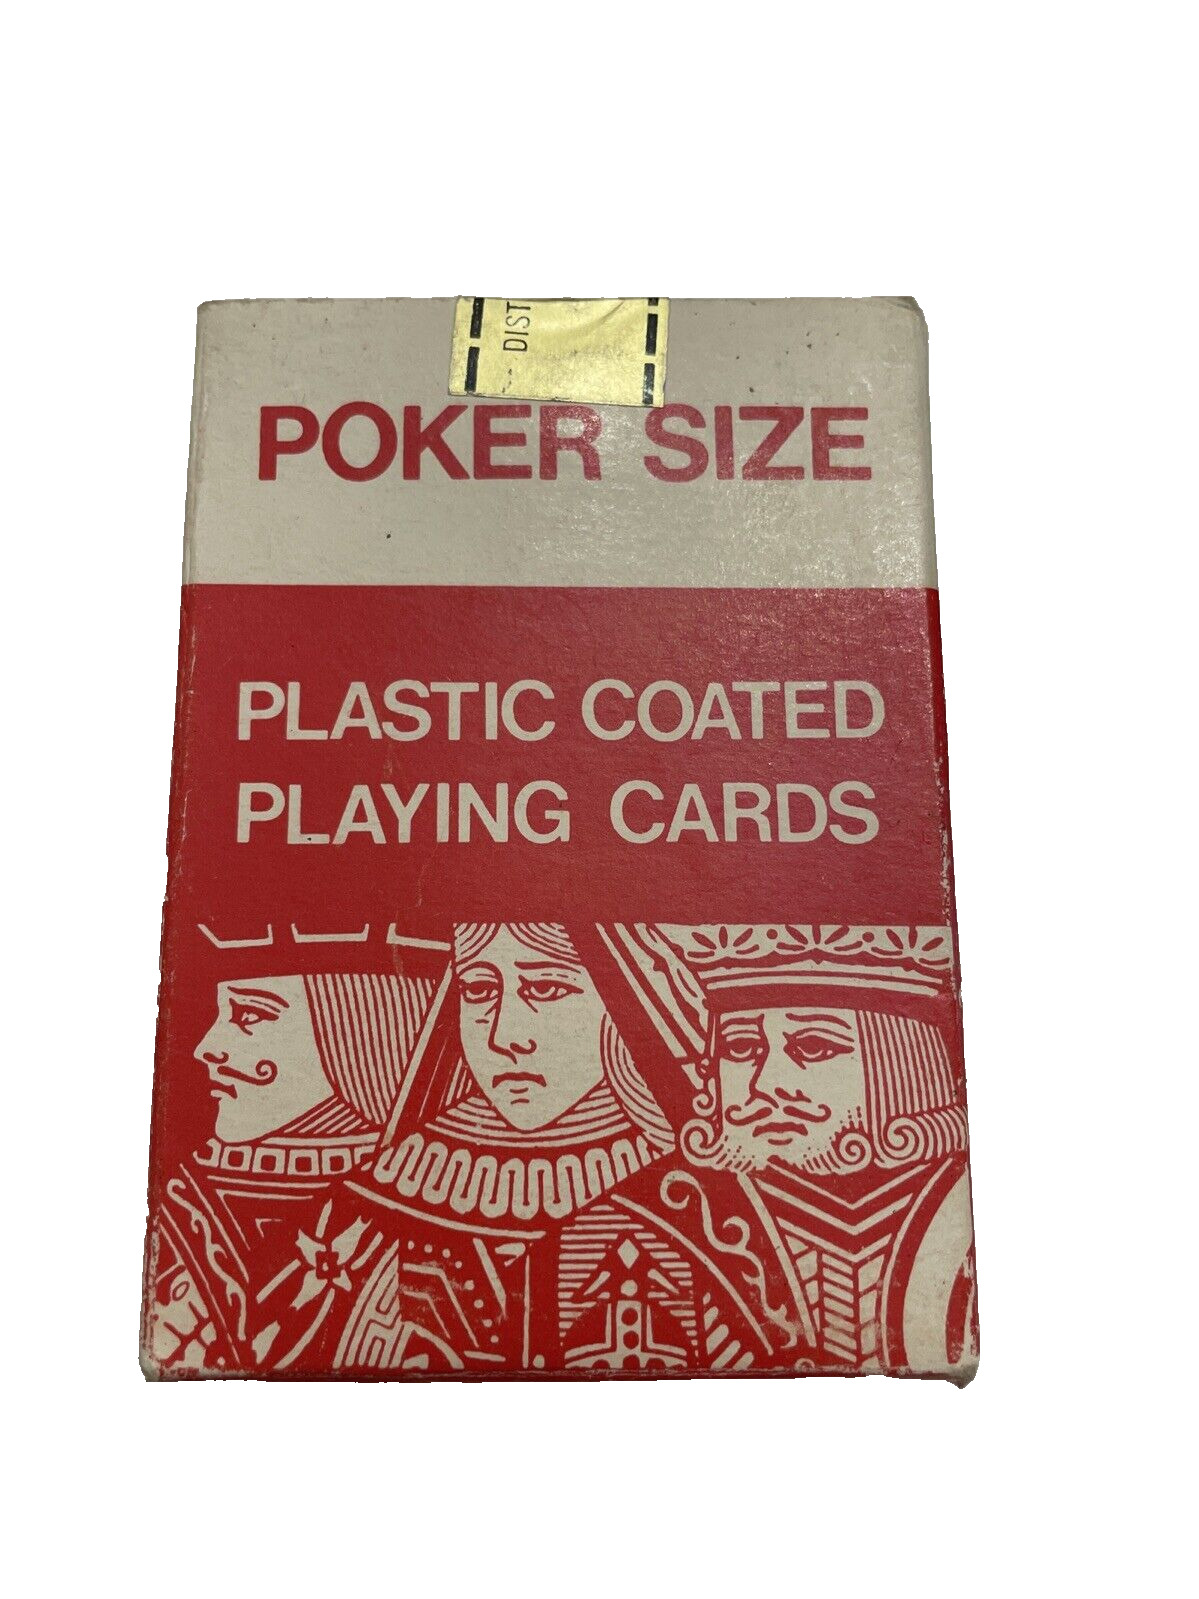 VINTAGE WORLD WIDE PLEASURE PLASTIC COATED Poker Game Playing Cards *SEALED